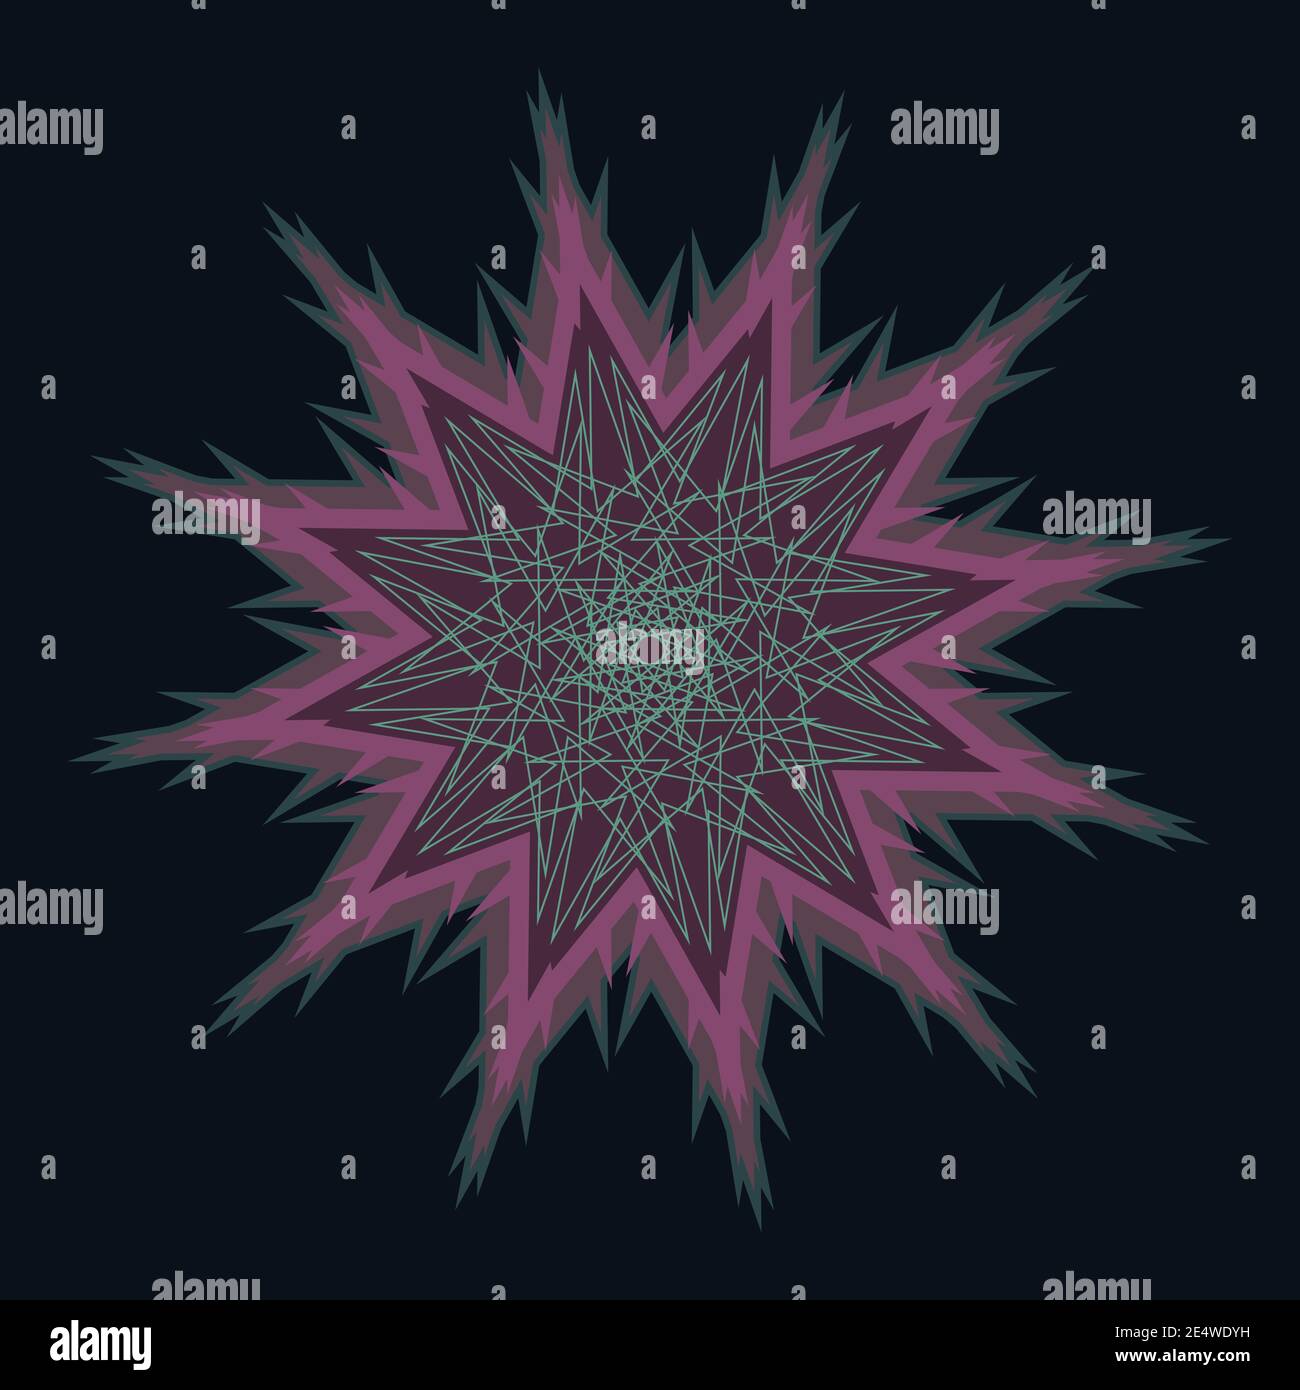 An abstract retro star shape background image. Stock Vector